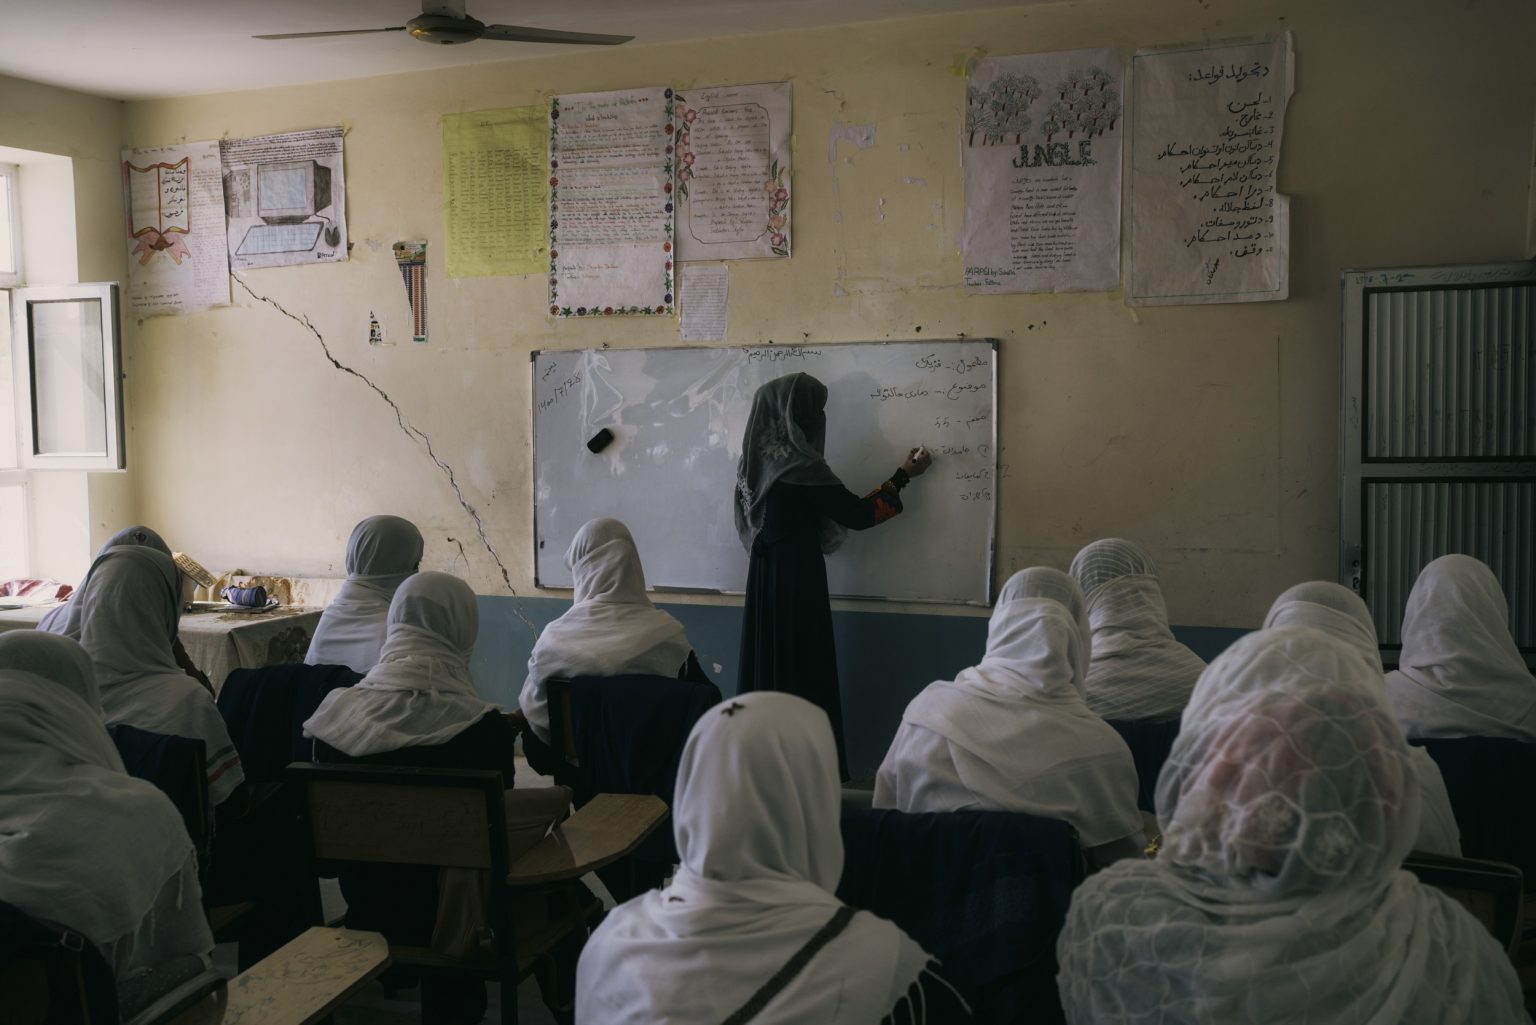 ZABUL, AFGHANISTAN - OCTOBER 20:
Girls above 6th grade are attending classes at Bibi Khala girls high school. In Kabul and most other parts of the county, the Taliban has forbidden girls older than 12 years old from attending.
(Photo by Lorenzo Tugnoli/ The Washington Post)